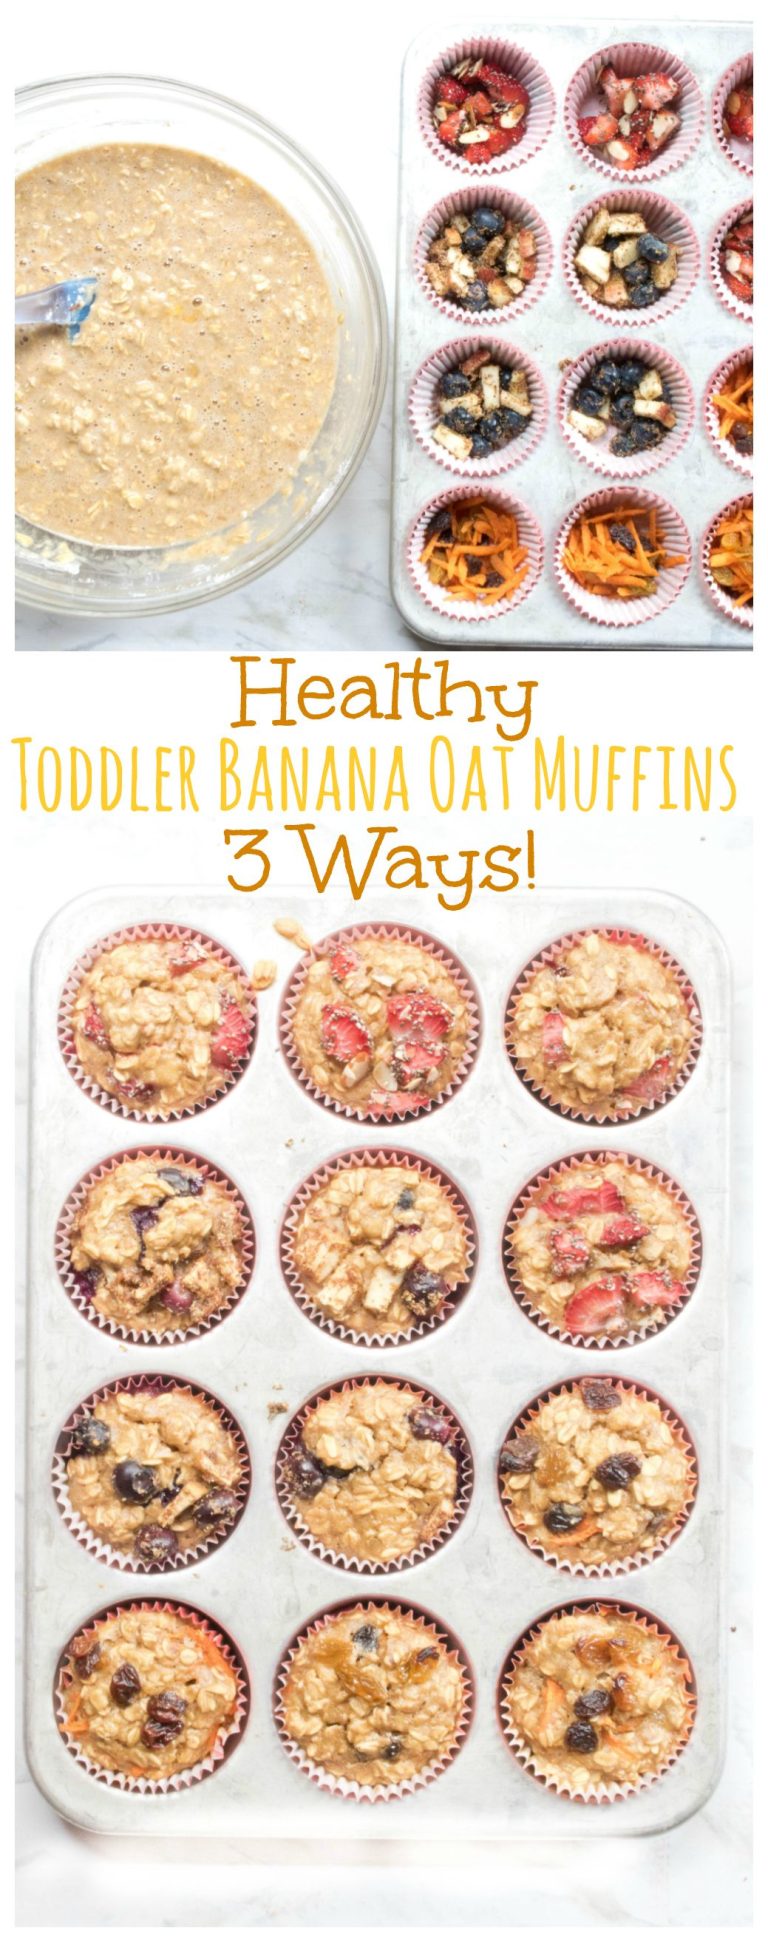 Healthy Banana Oatmeal Muffins For Toddlers